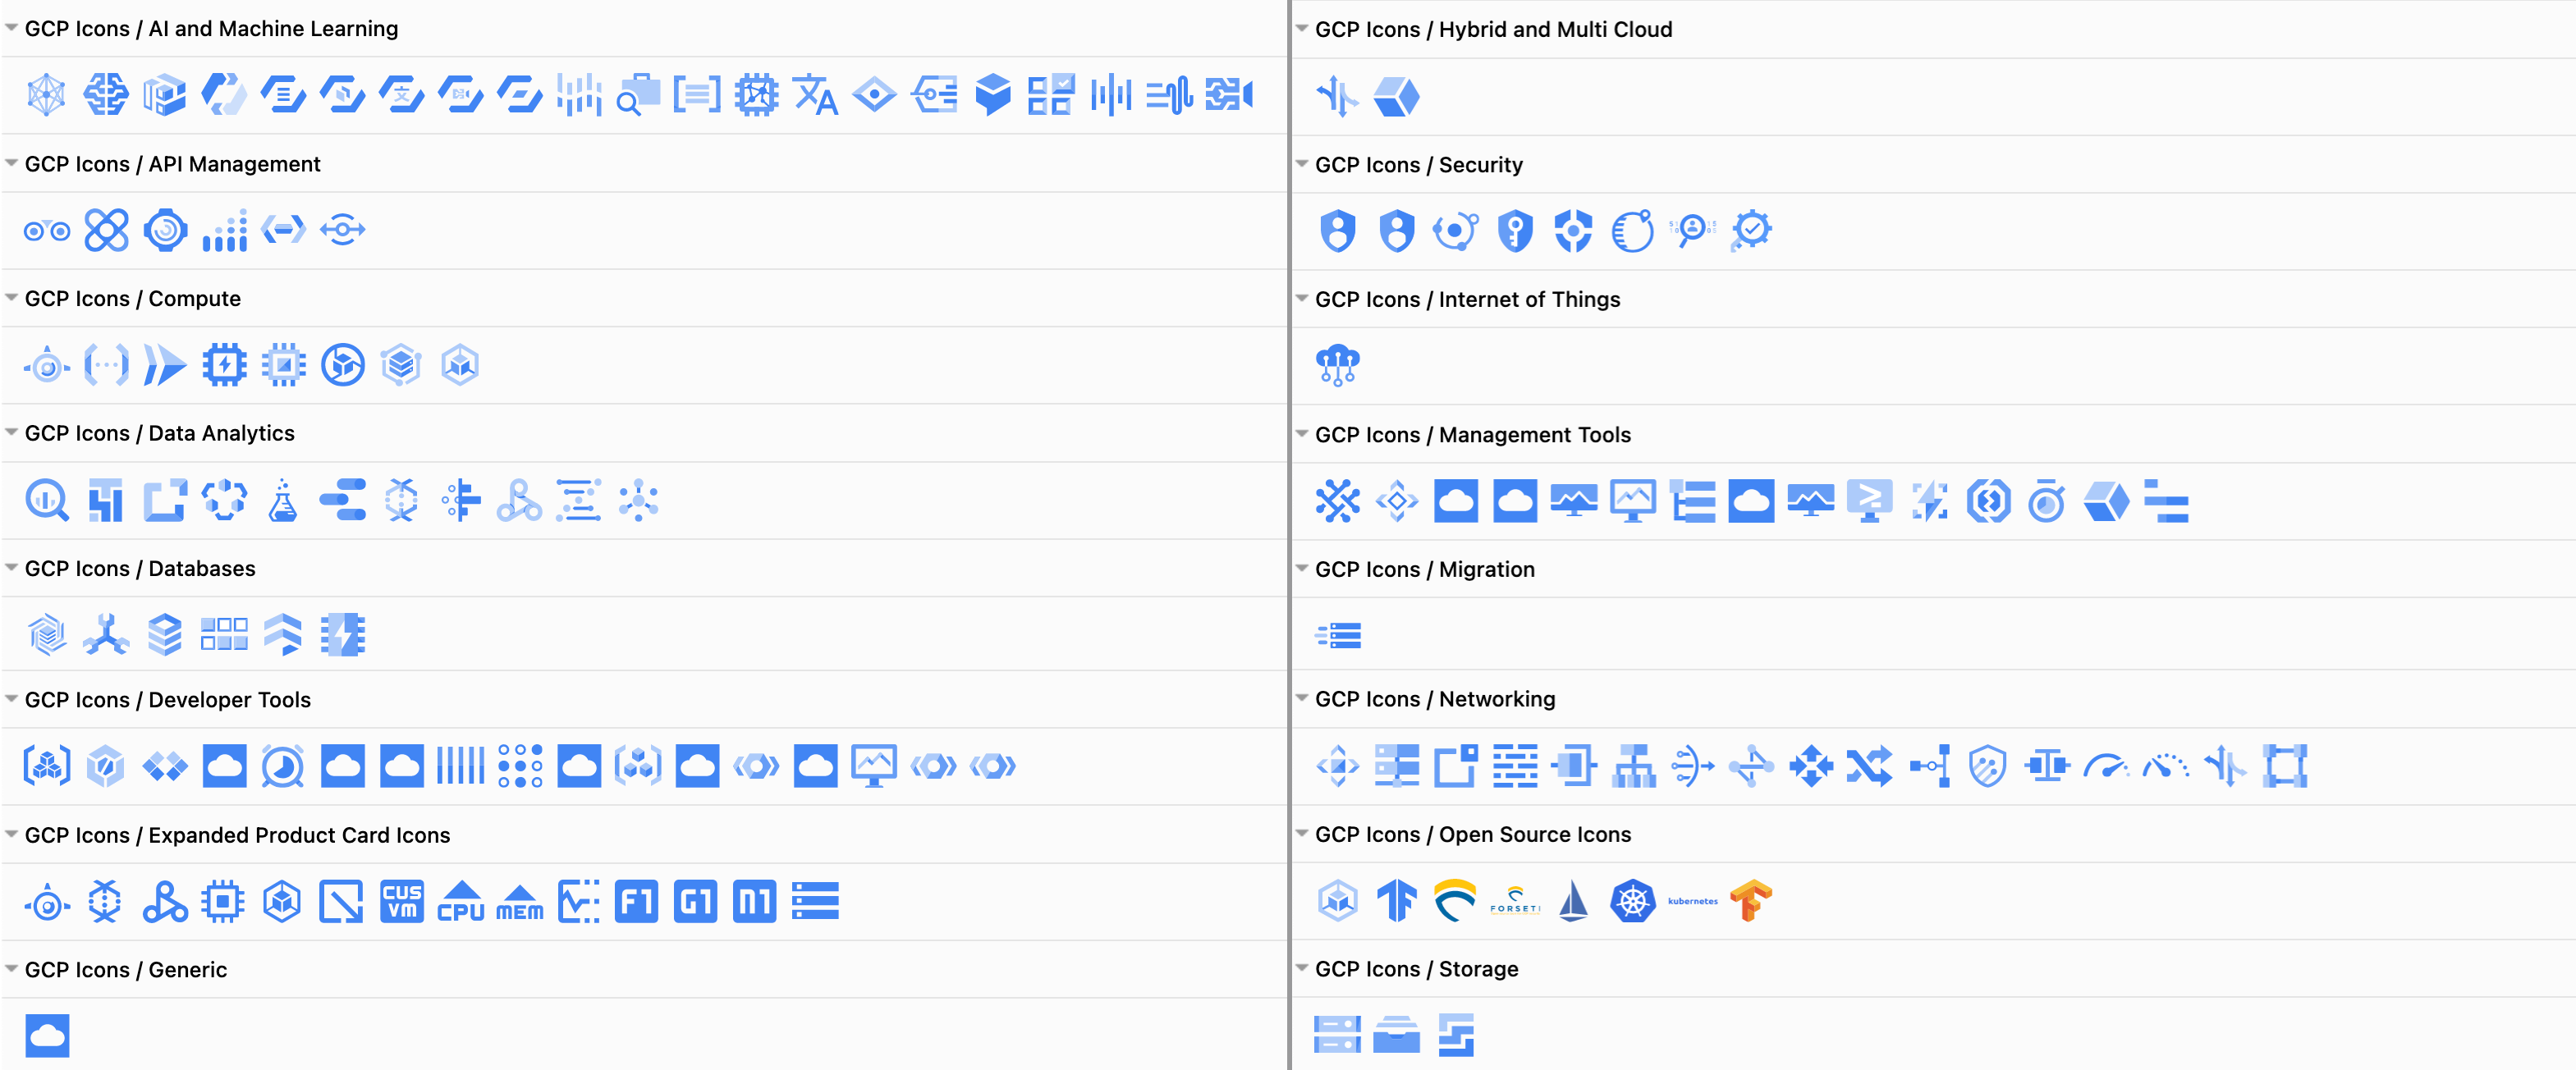 The GCP icons shape library for Google Cloud Platform infrastructure diagrams has been updated in draw.io